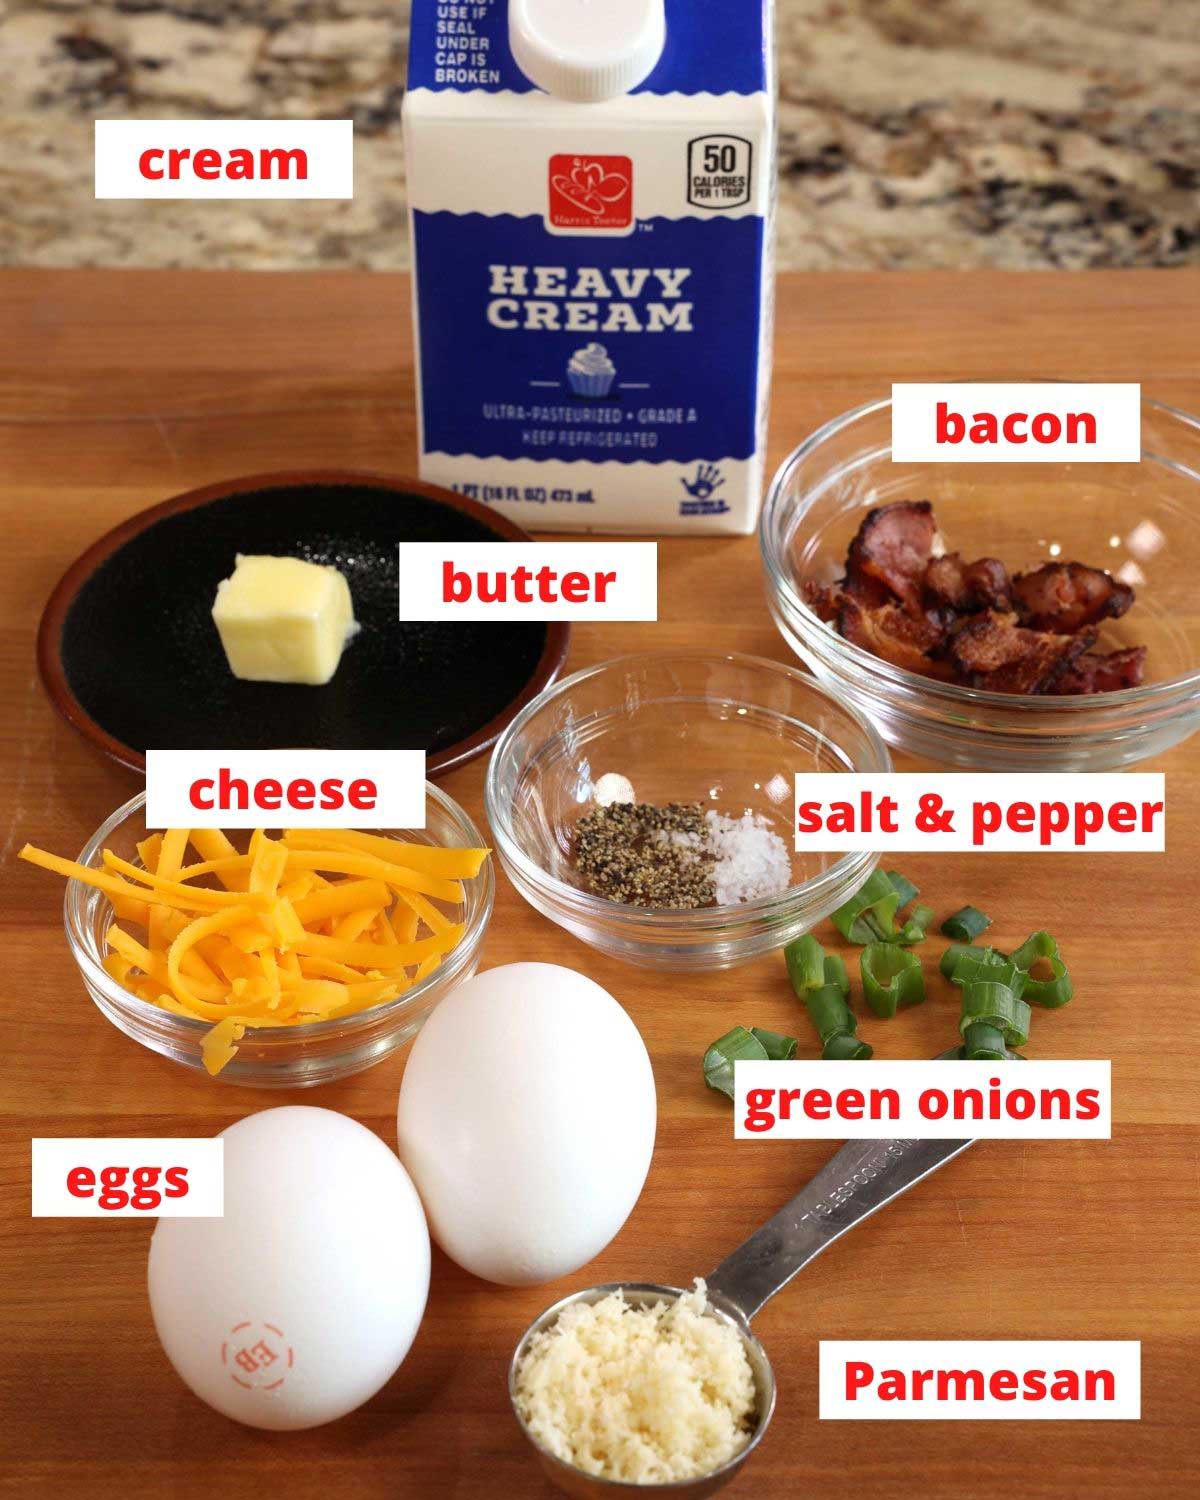 eggs, cheese, bacon, cream, butter, and green onions on a brown wooden cutting board.